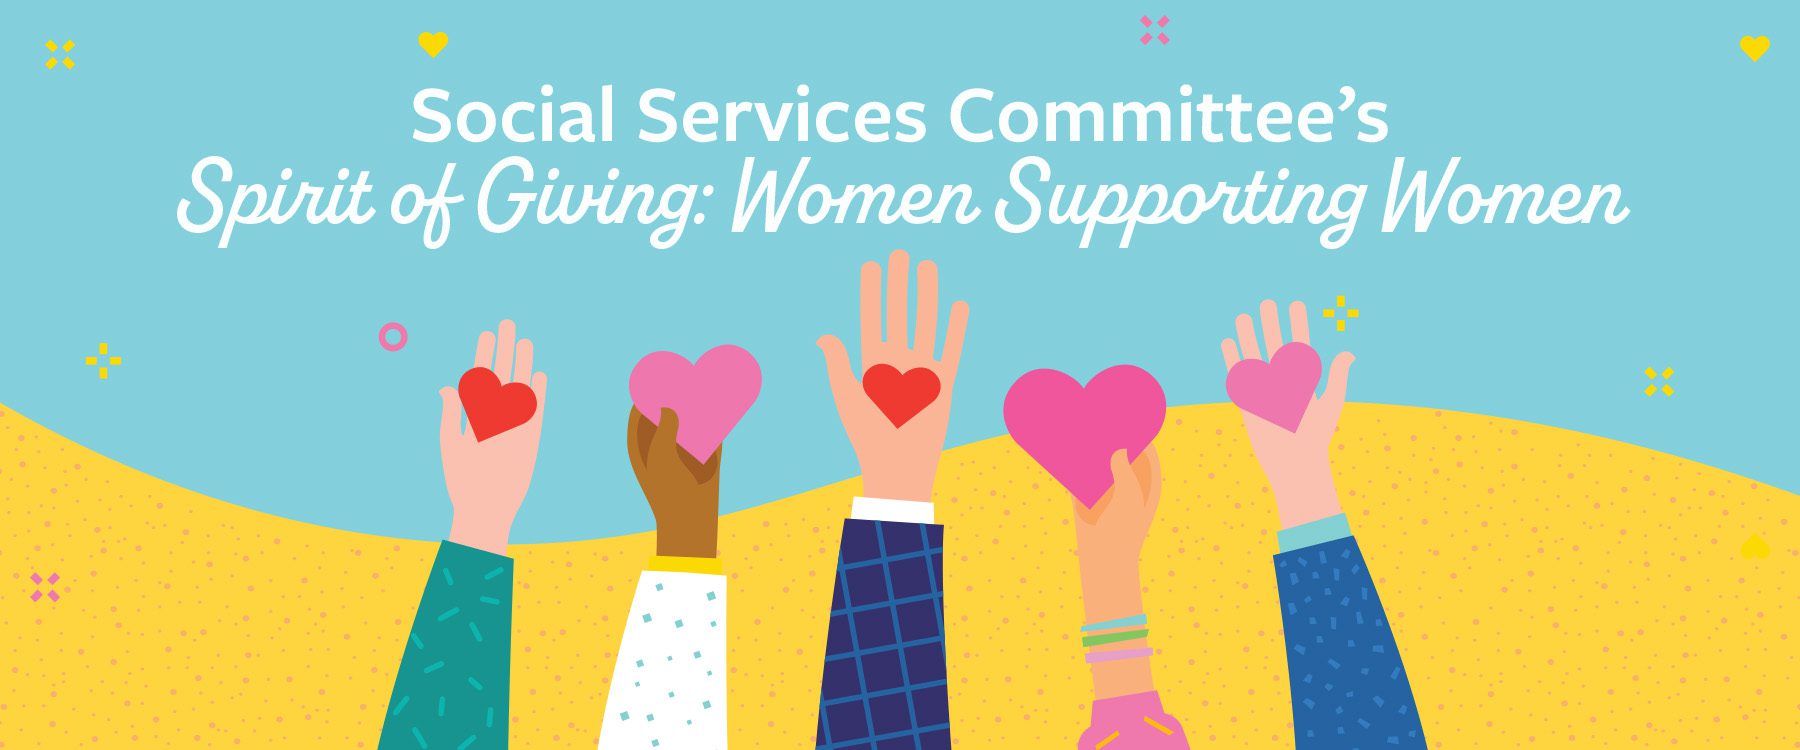 Social Services Committee Spirit of Giving: Women Supporting Women